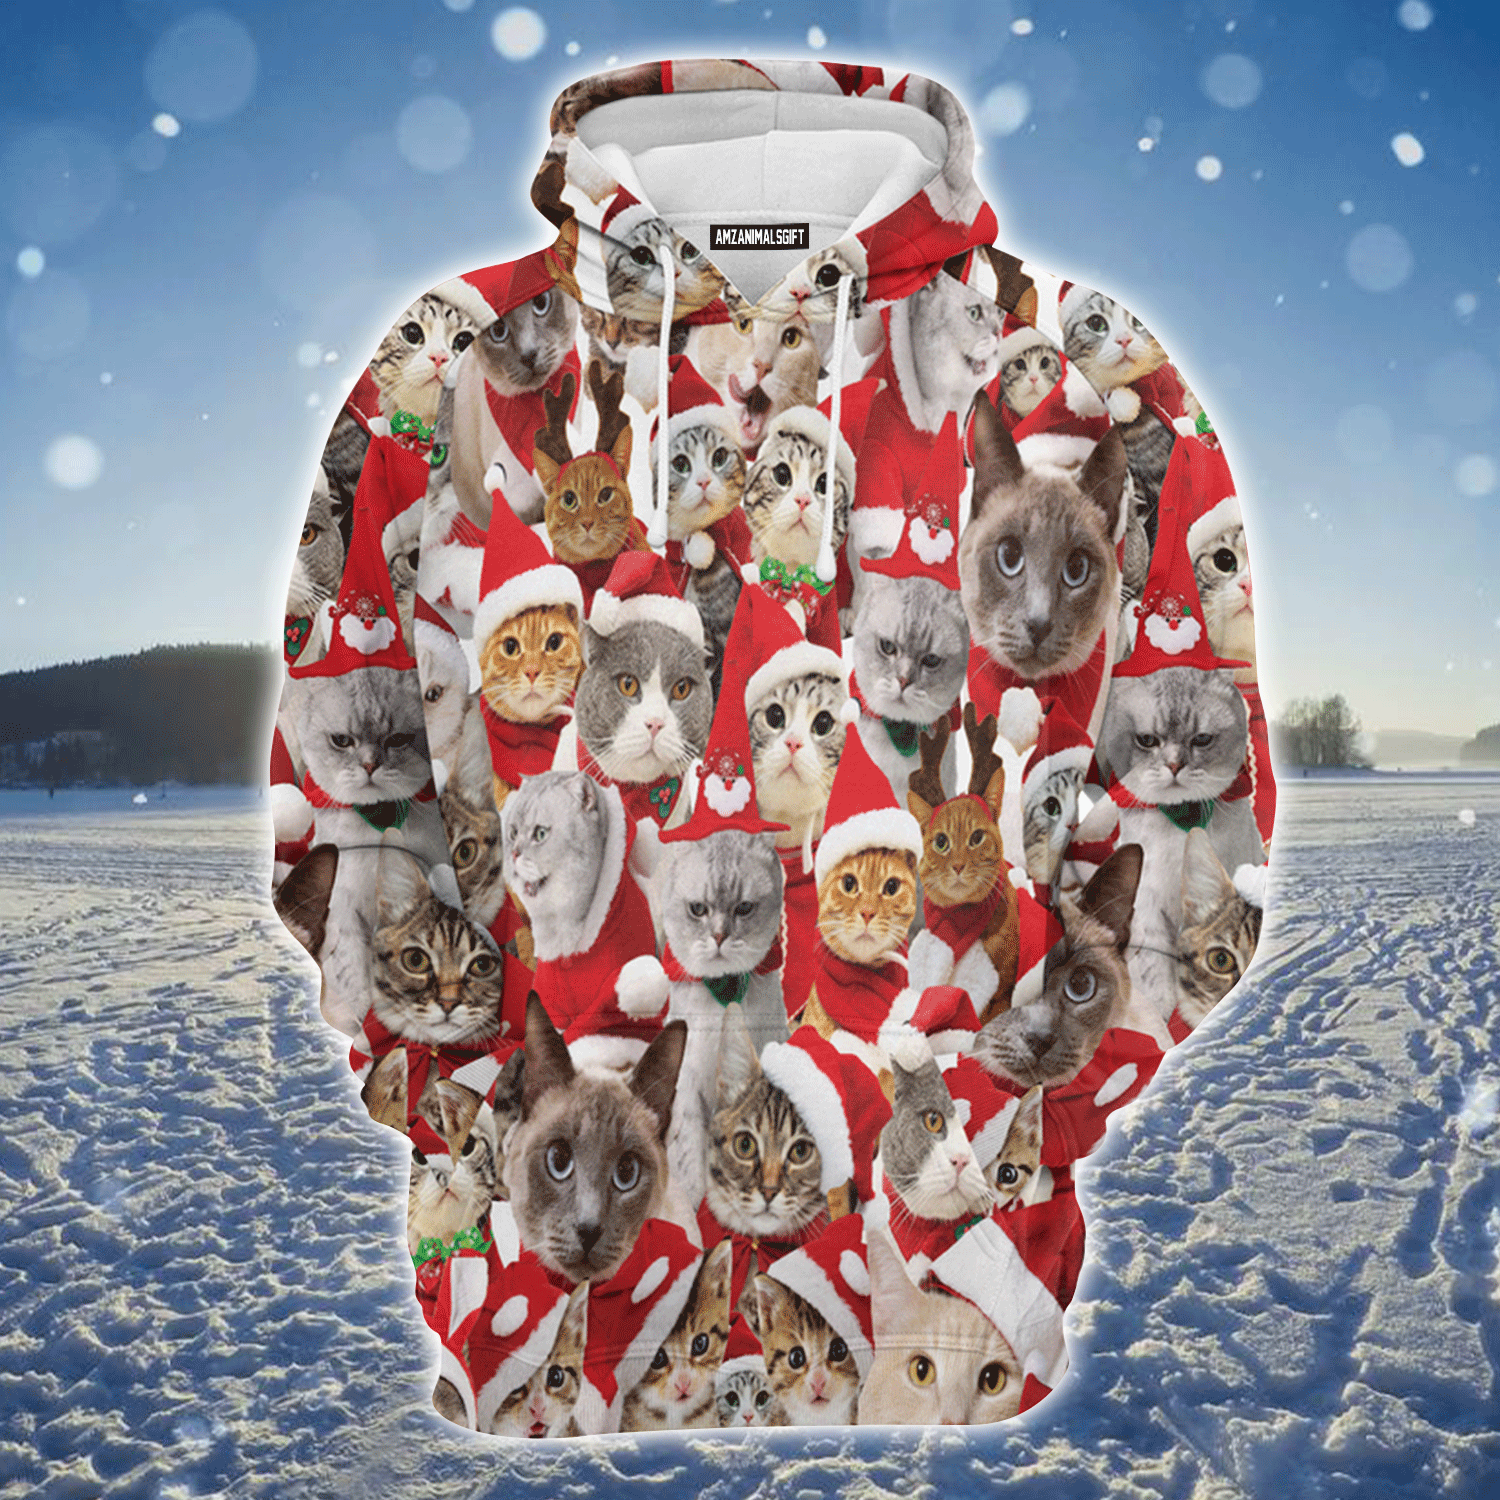 Cats Premium Christmas Hoodie, Lovely Cats Christmas Unisex Hoodie For Men & Women - Perfect Gift For Christmas, Cats Lovers